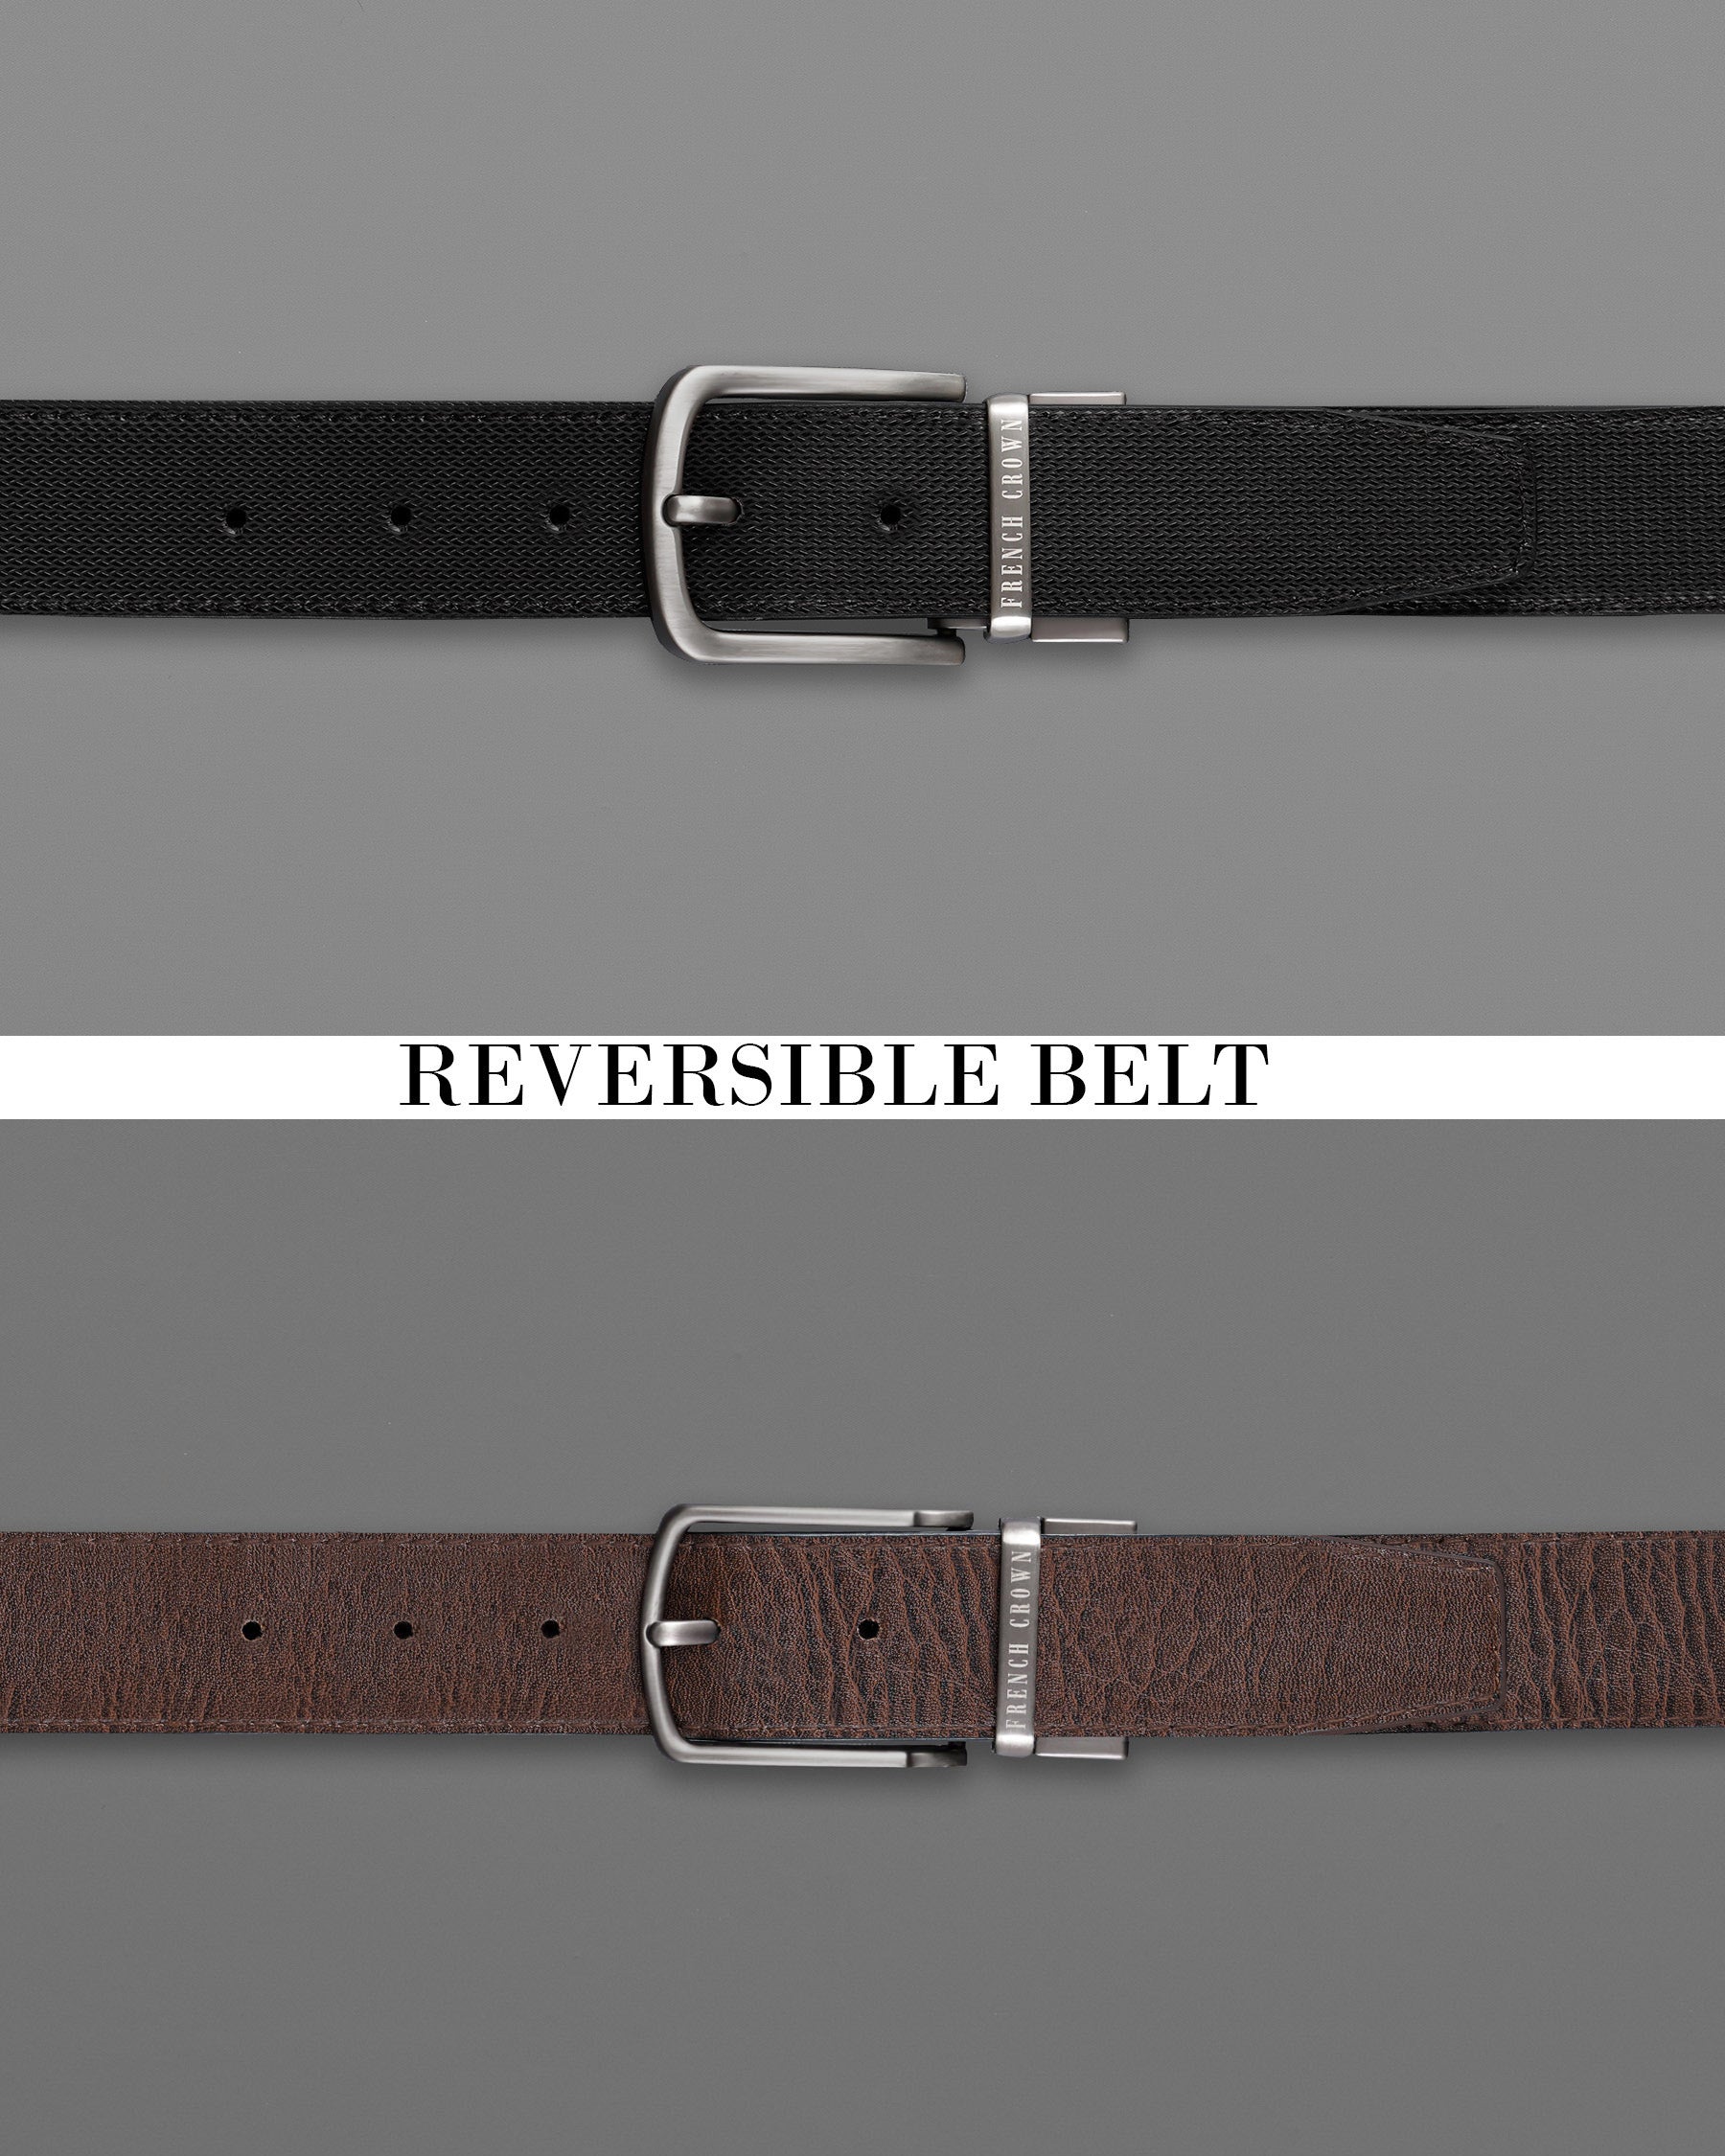 Silver Metallic Buckle Glossy Finish with Jade Black and Brown Leather Free Handcrafted Reversible Belt BT055-28, BT055-30, BT055-32, BT055-34, BT055-36, BT055-38 